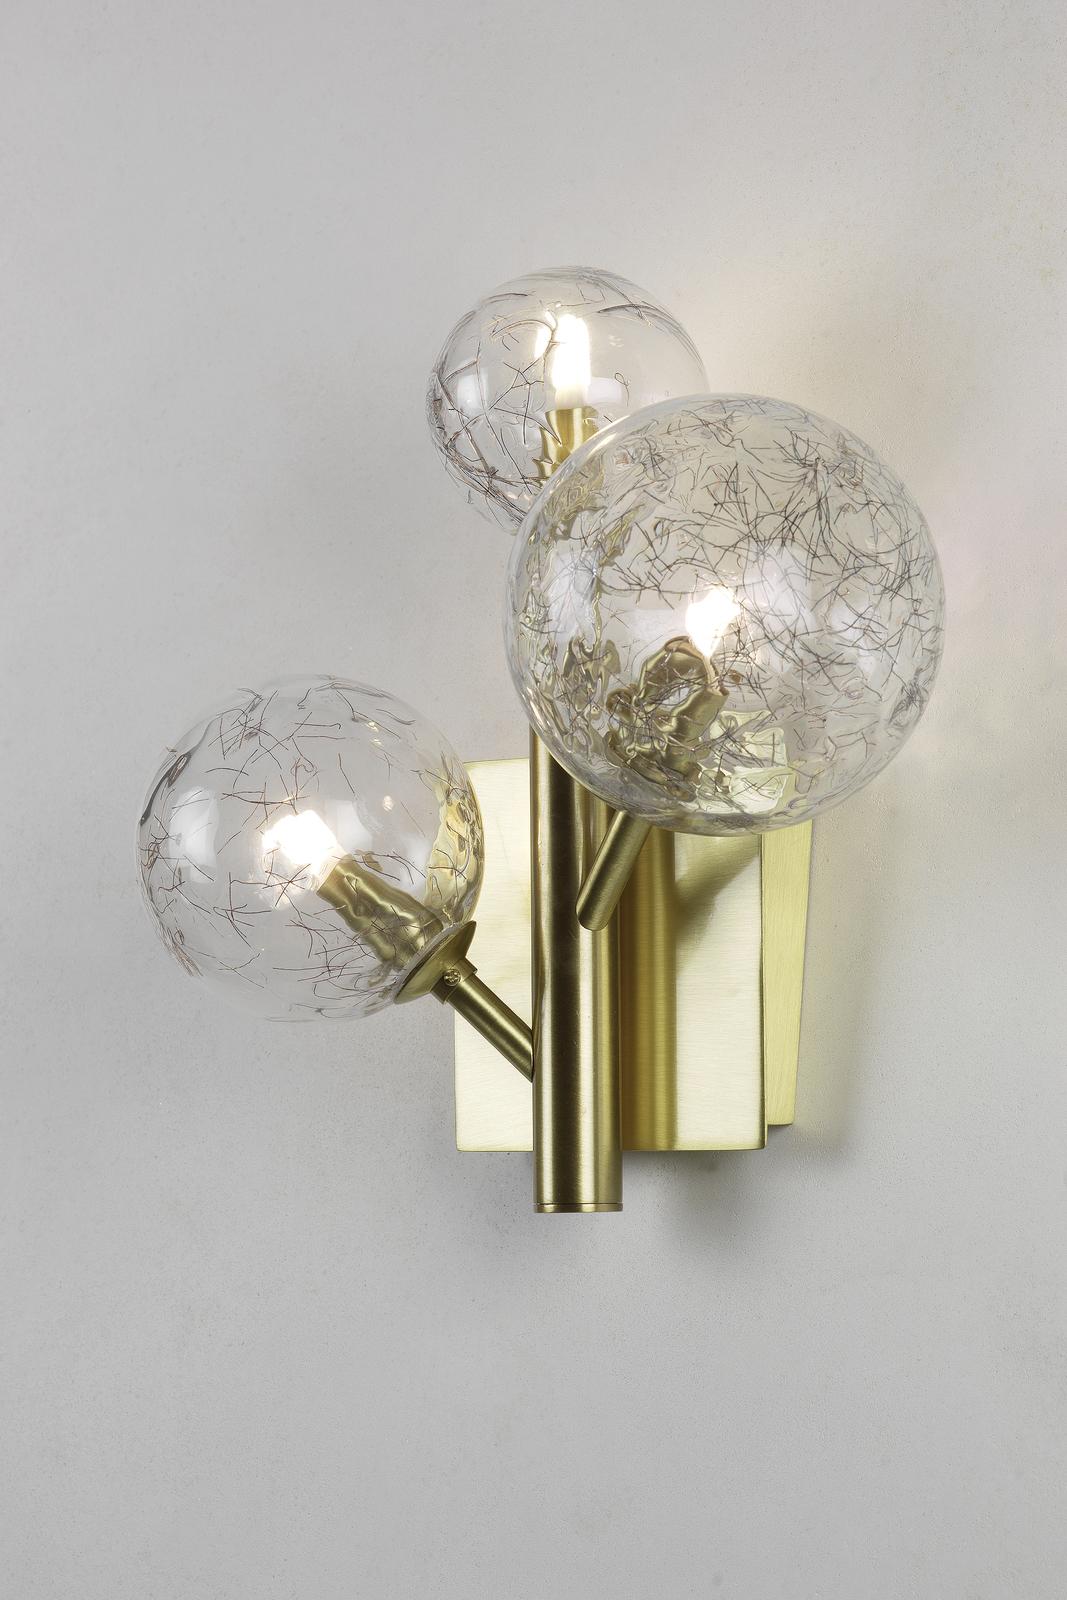 The delicate silhouette of this elegant wall light makes it perfect for illuminating intimate spaces in the home or office. Mounted on a square brass finished base, is a linear brass structure with two extending arms, all bearing a lustrous finish.